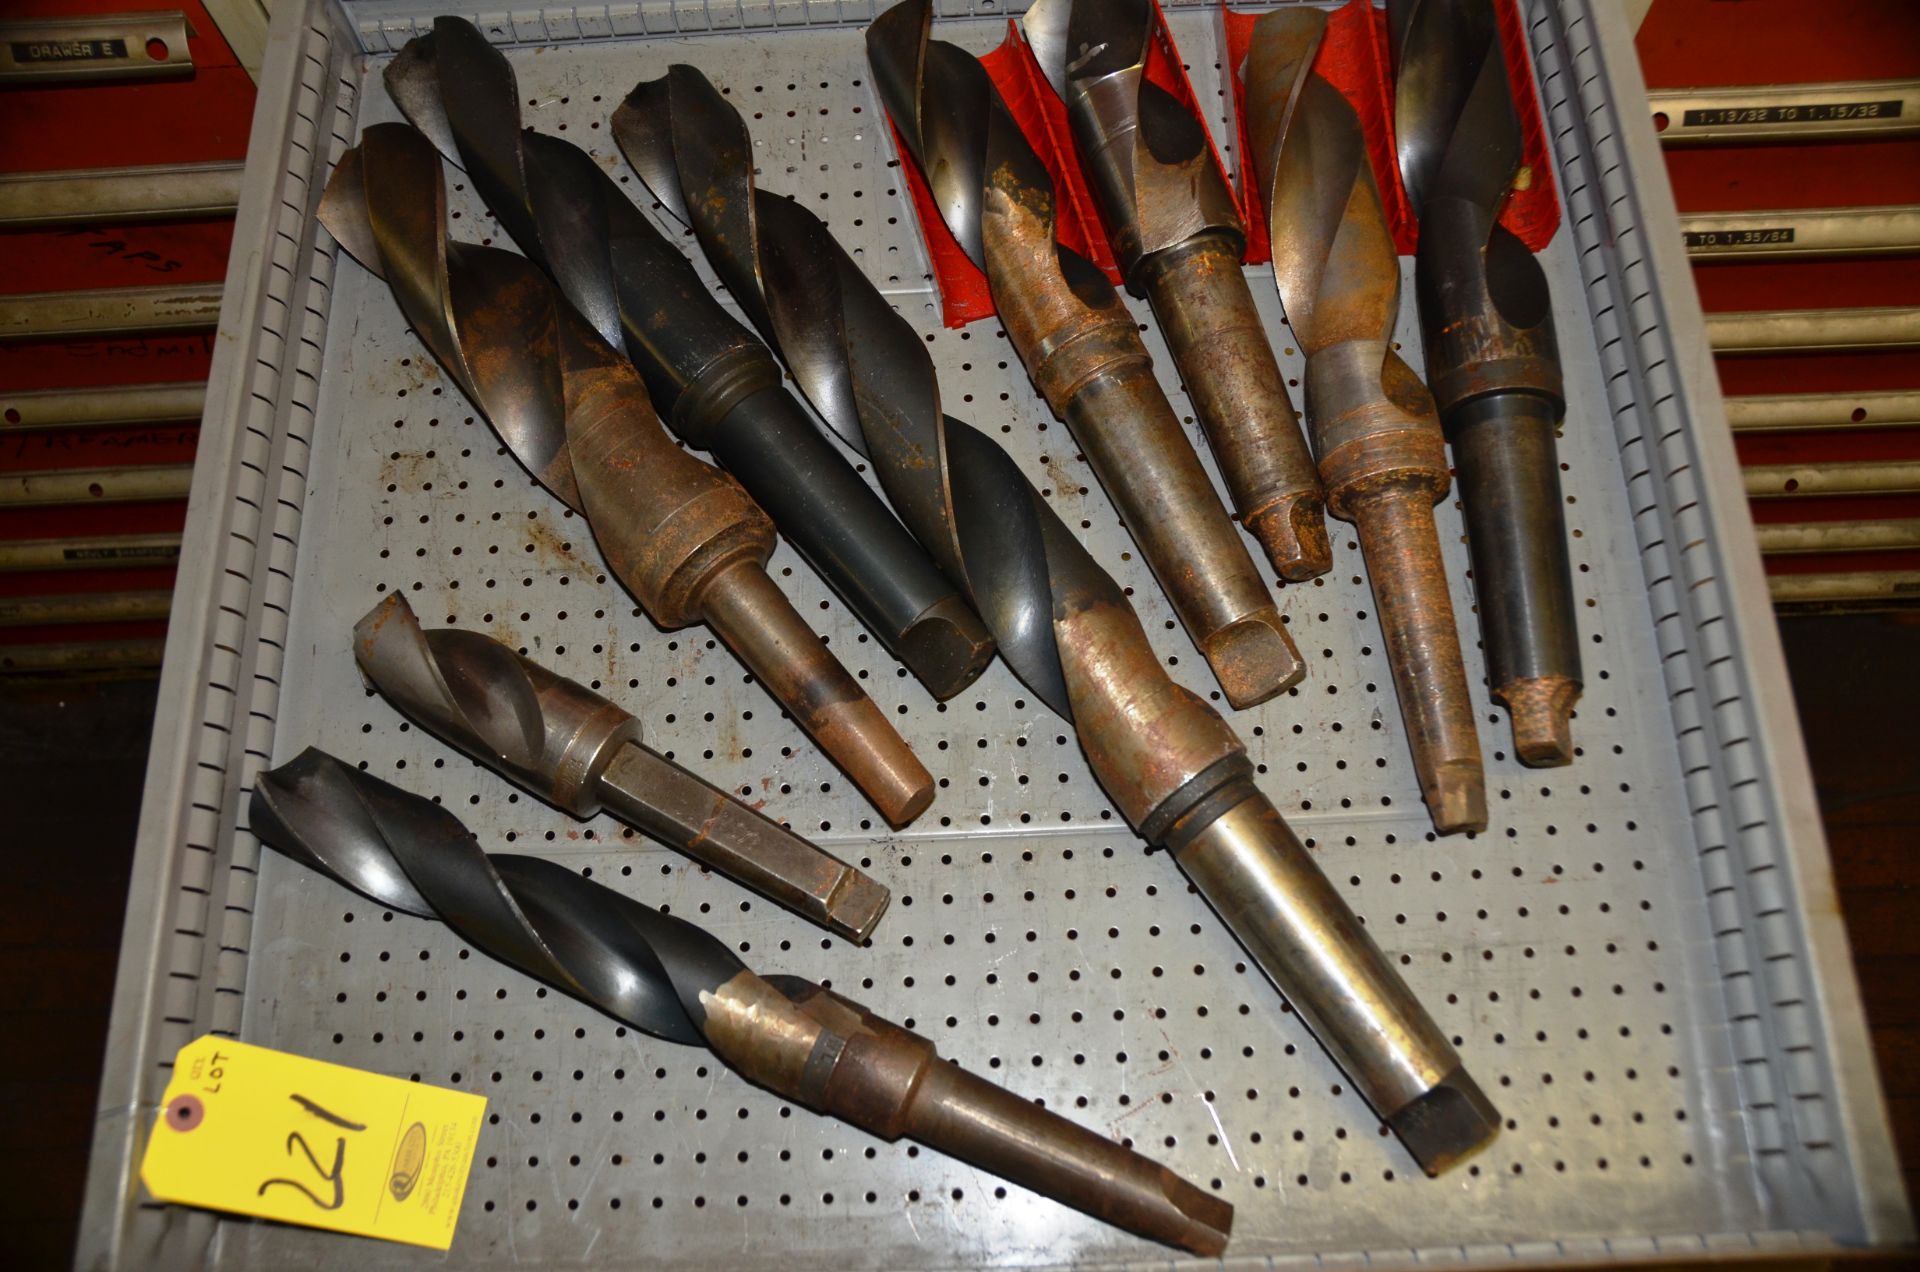 DRAWER CONTENTS, MISC. MORSE TAPER DRILLS